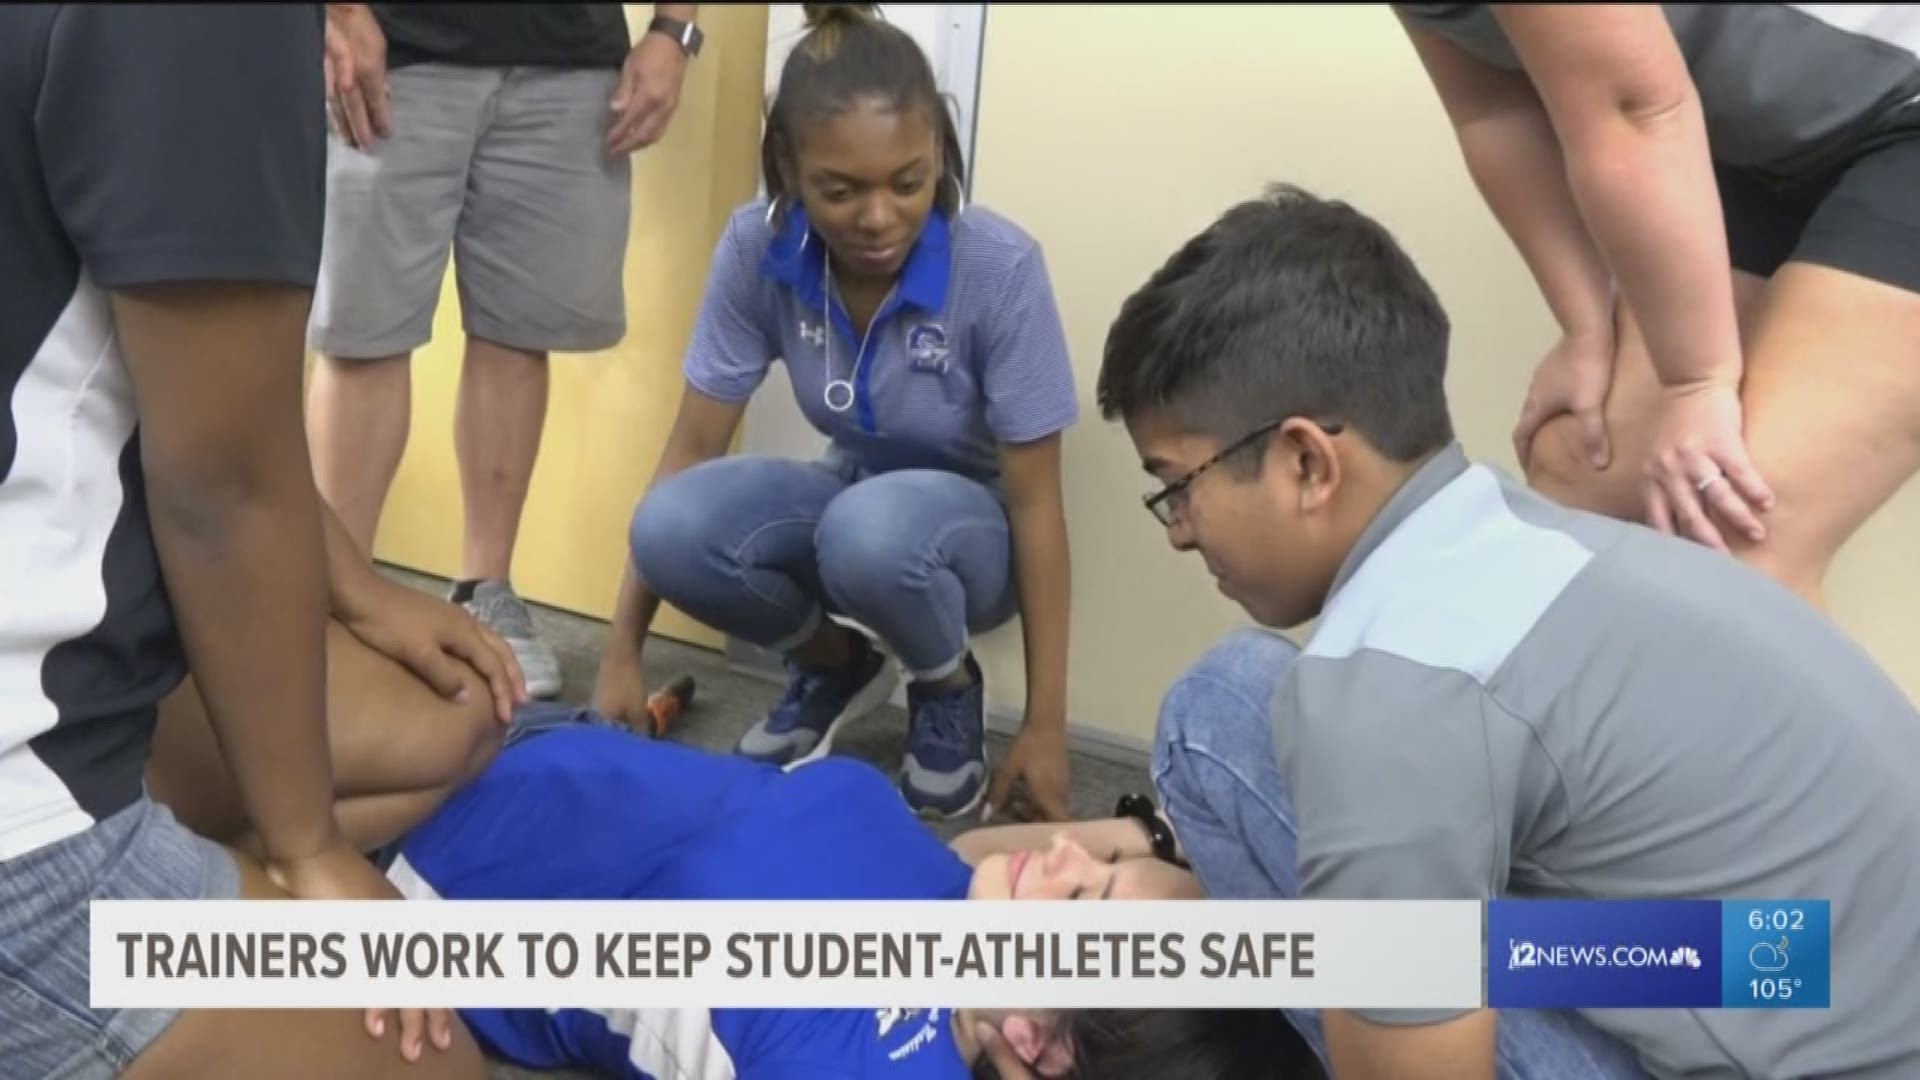 As students prepare to return to school, athletic trainers from around the Valley gathered Saturday to discuss the best ways to help keep student-athletes safe.